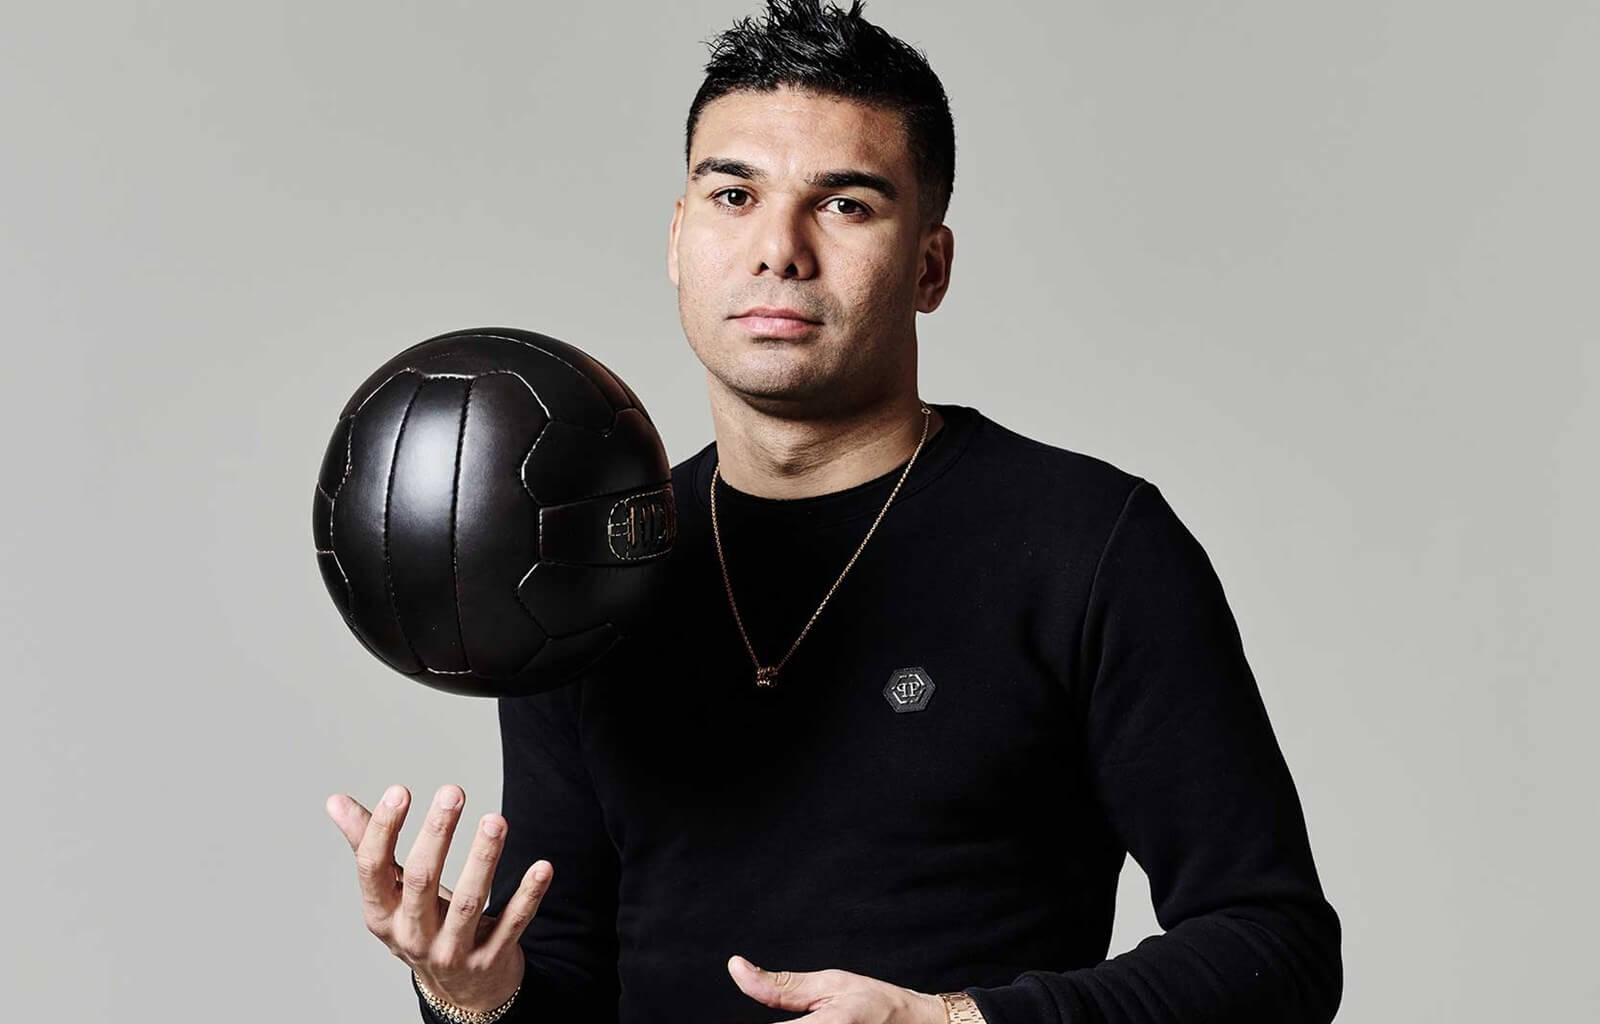 Top 10 Highest paid Players in EPL casemiro - Top 10 Highest-Paid Players in EPL (2023)